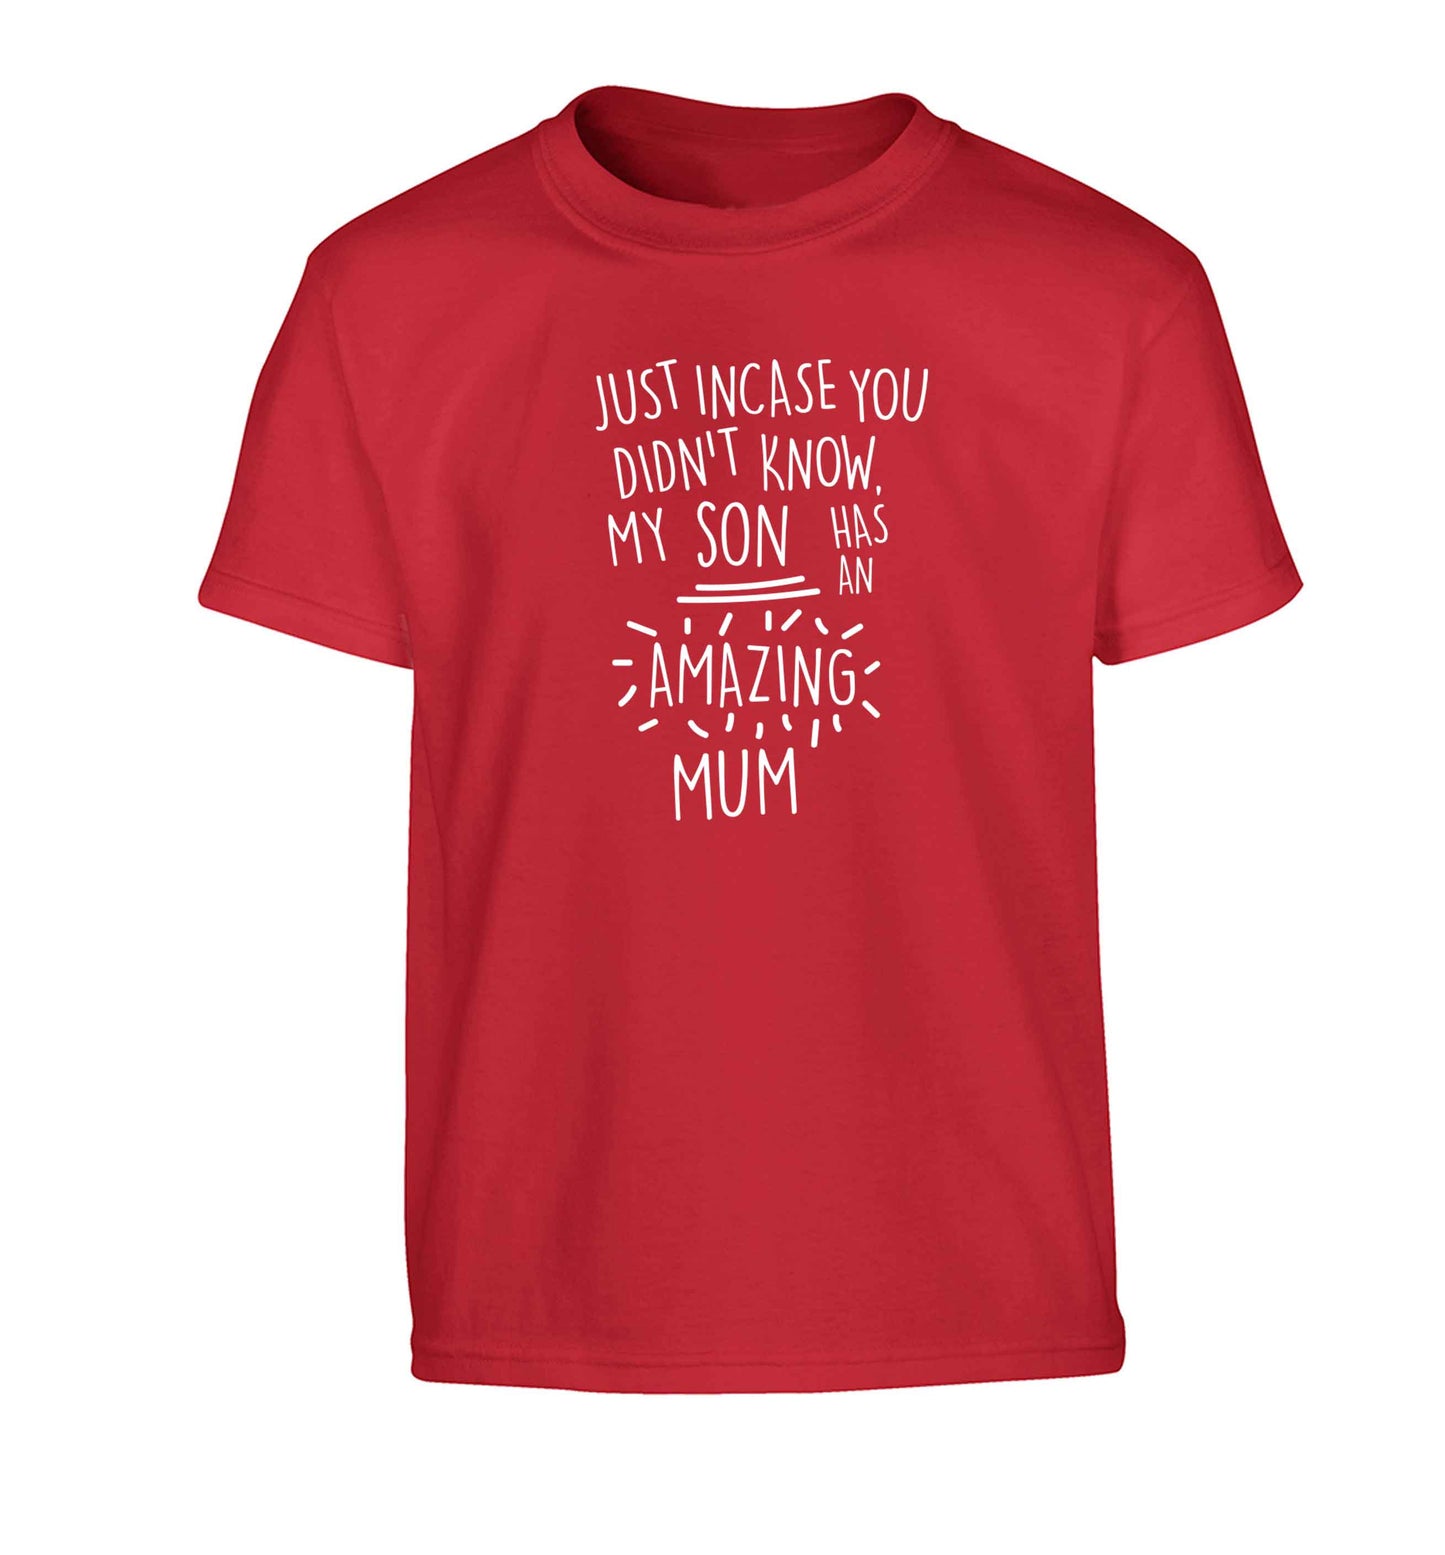 Just incase you didn't know my son has an amazing mum Children's red Tshirt 12-13 Years